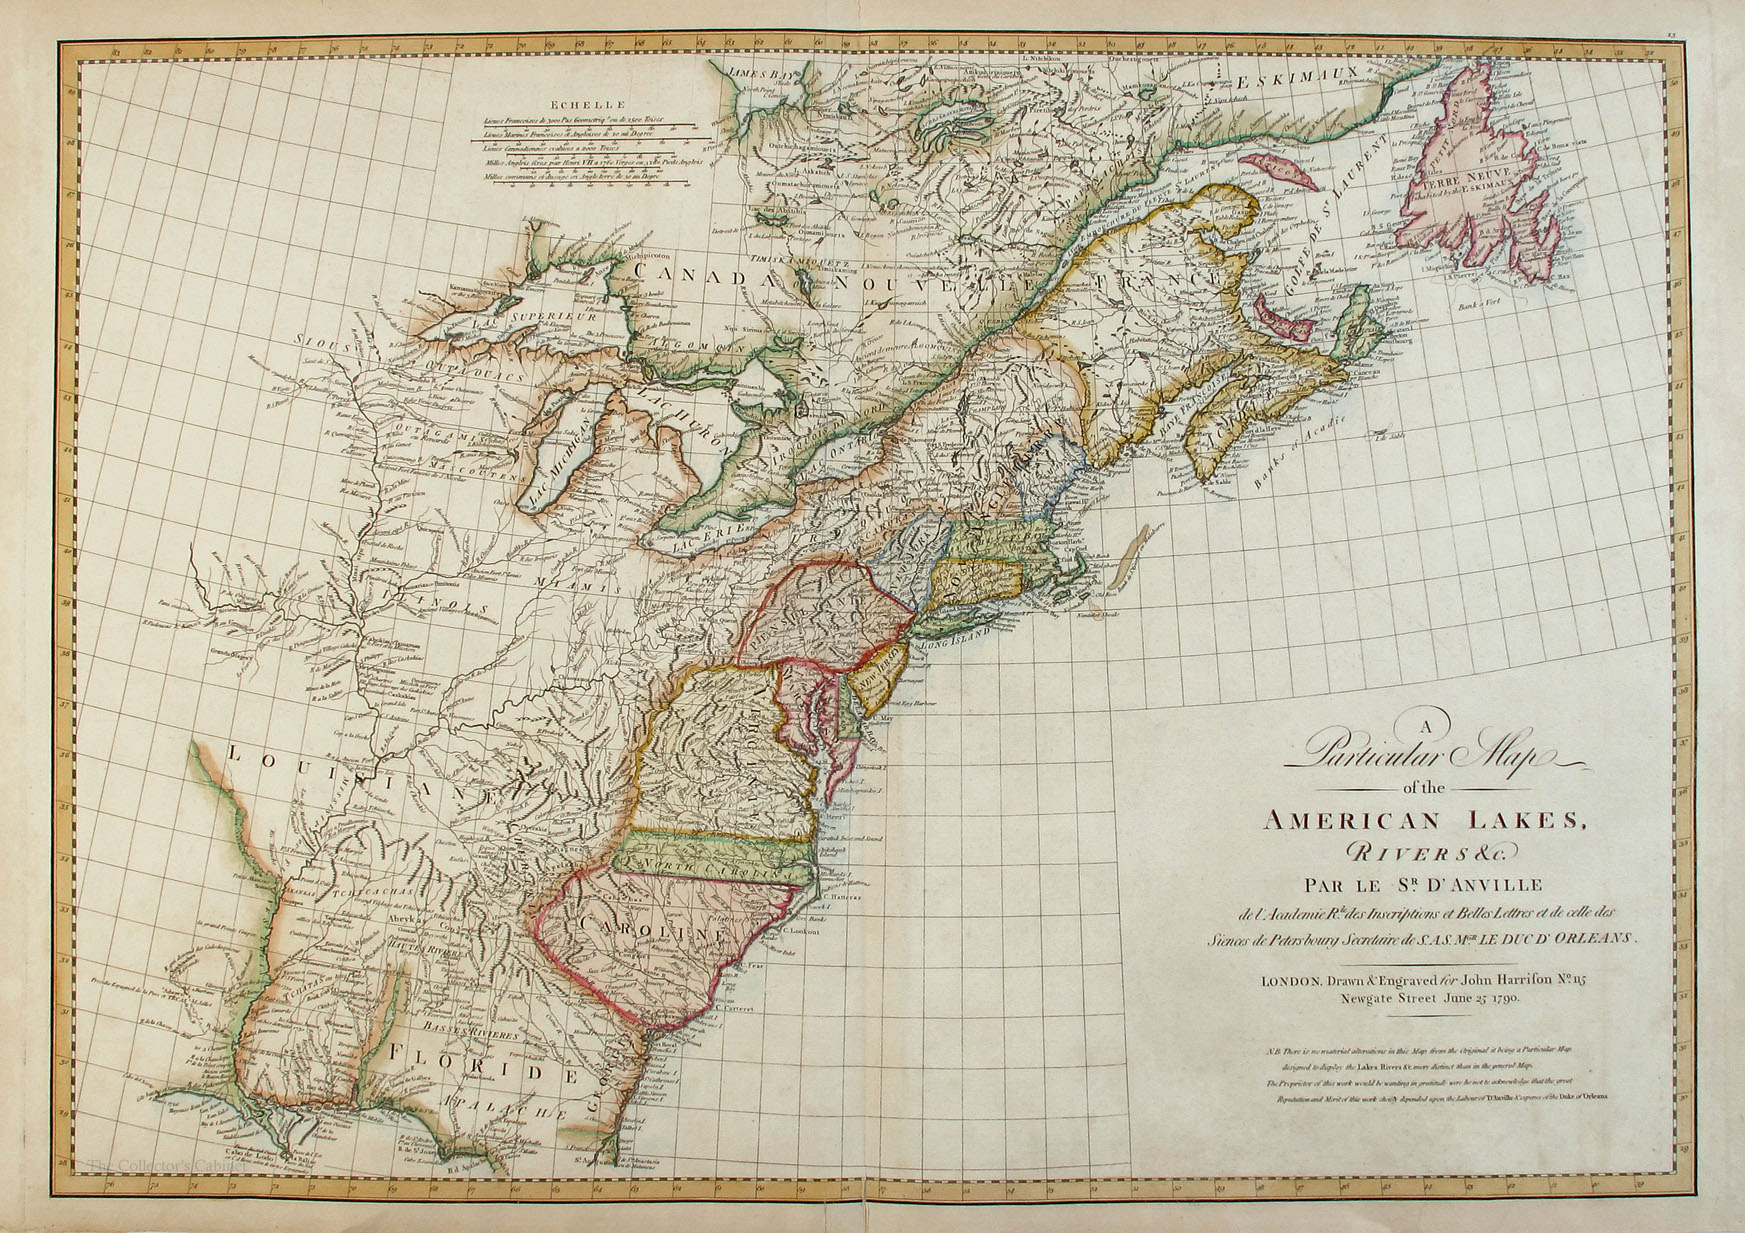 1790 Map of the Eastern seaboard of North America, by Jean Baptiste Bourguignon d'Anville.